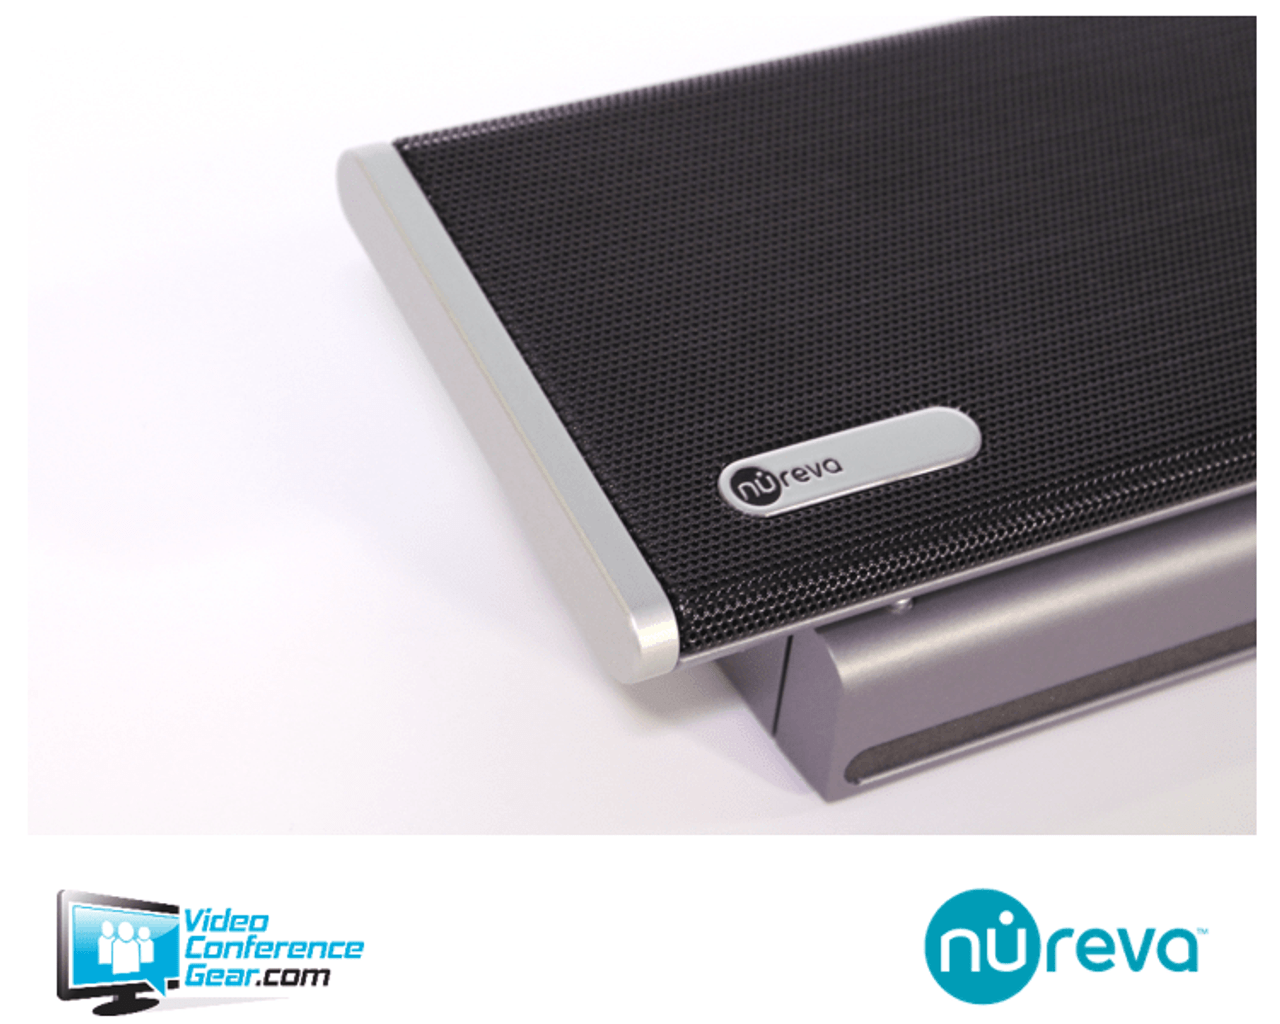 Nureva HDL300 Audio Conferencing System Powered by Nureva Microphone Mist technology